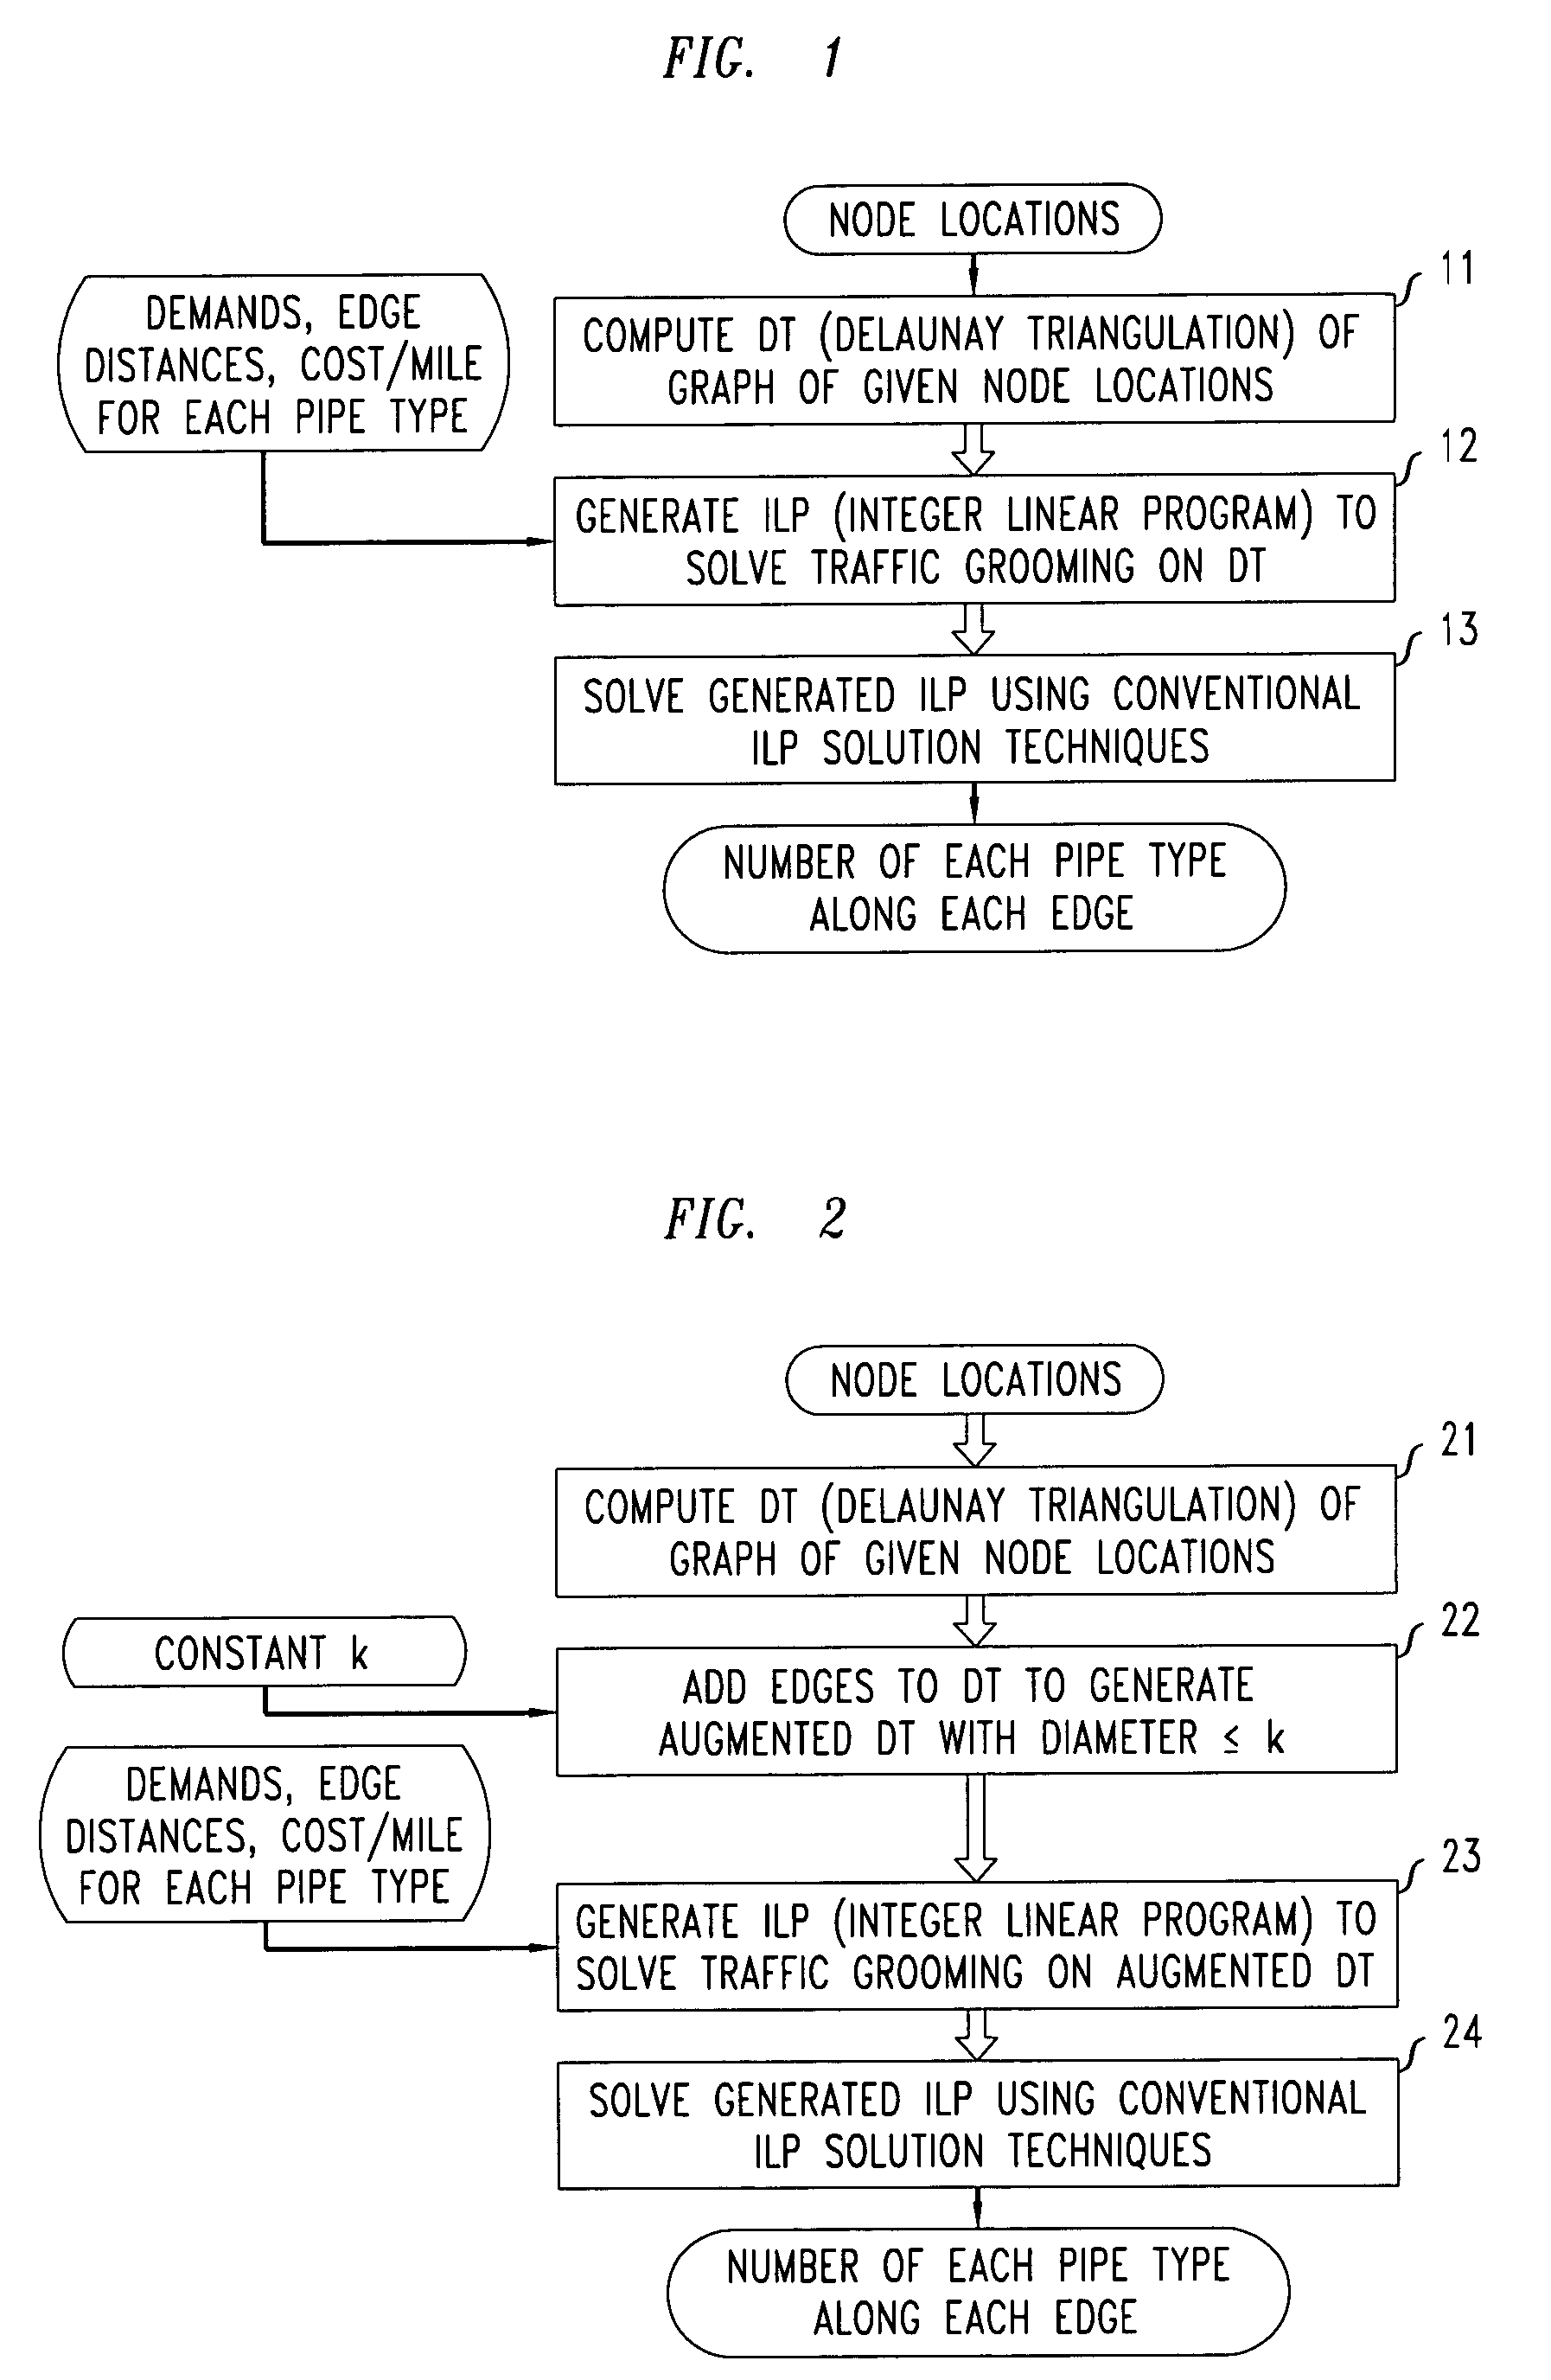 Method and apparatus for grooming traffic demands according to mileage based tariffs